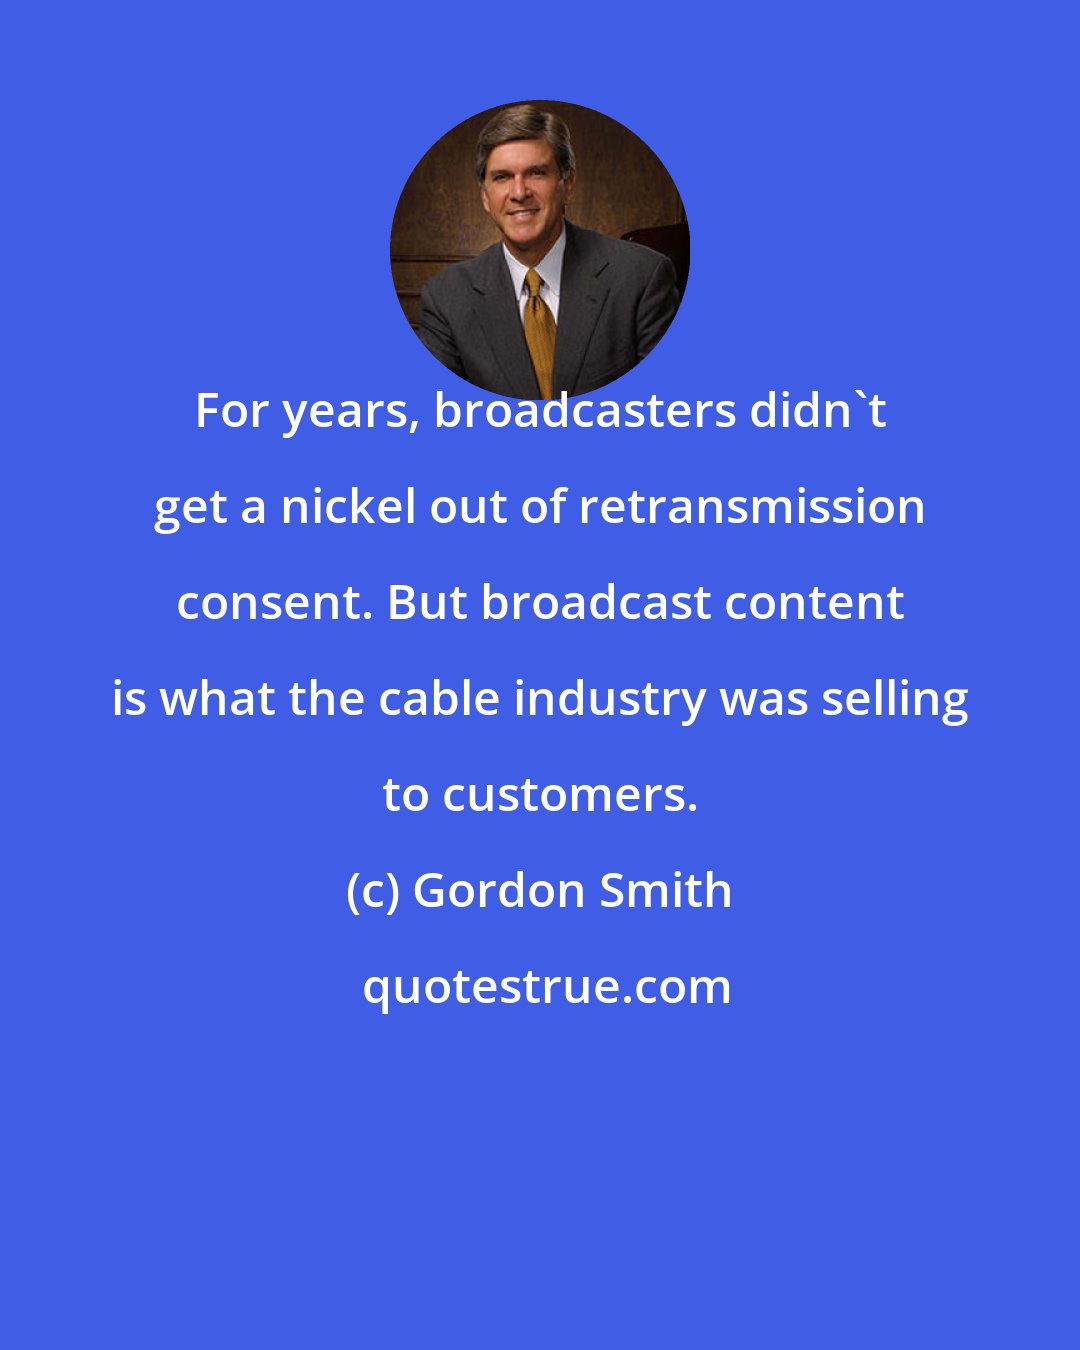 Gordon Smith: For years, broadcasters didn't get a nickel out of retransmission consent. But broadcast content is what the cable industry was selling to customers.